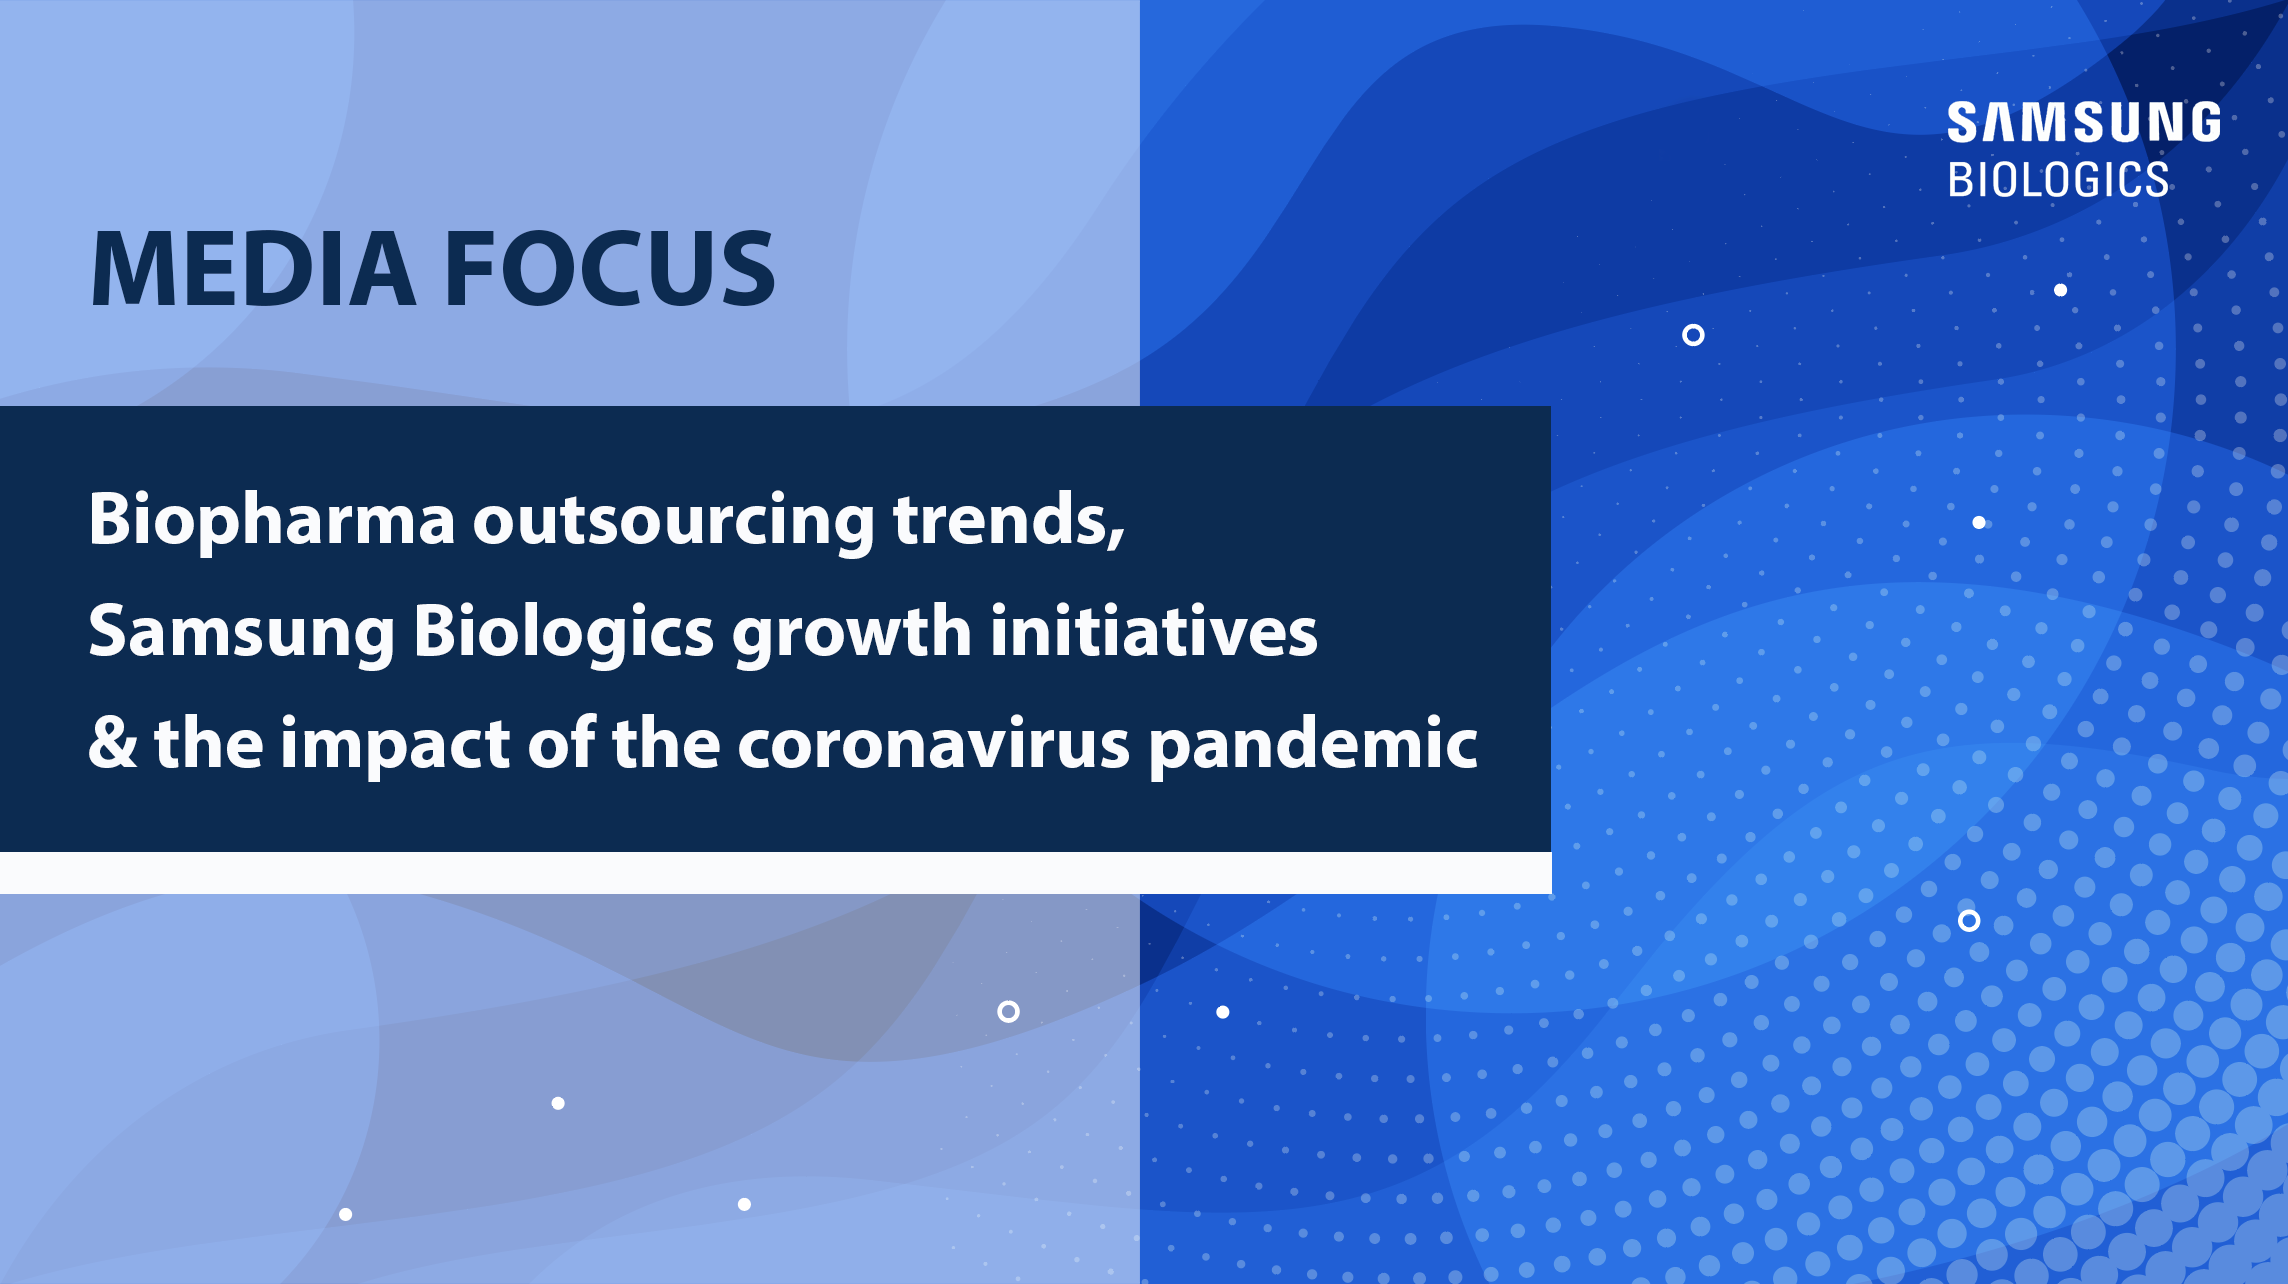 Media Focs Biopharma outsourcing trends, Samsung Biologics growth initiatives and the impact of the coronavirus pandemic